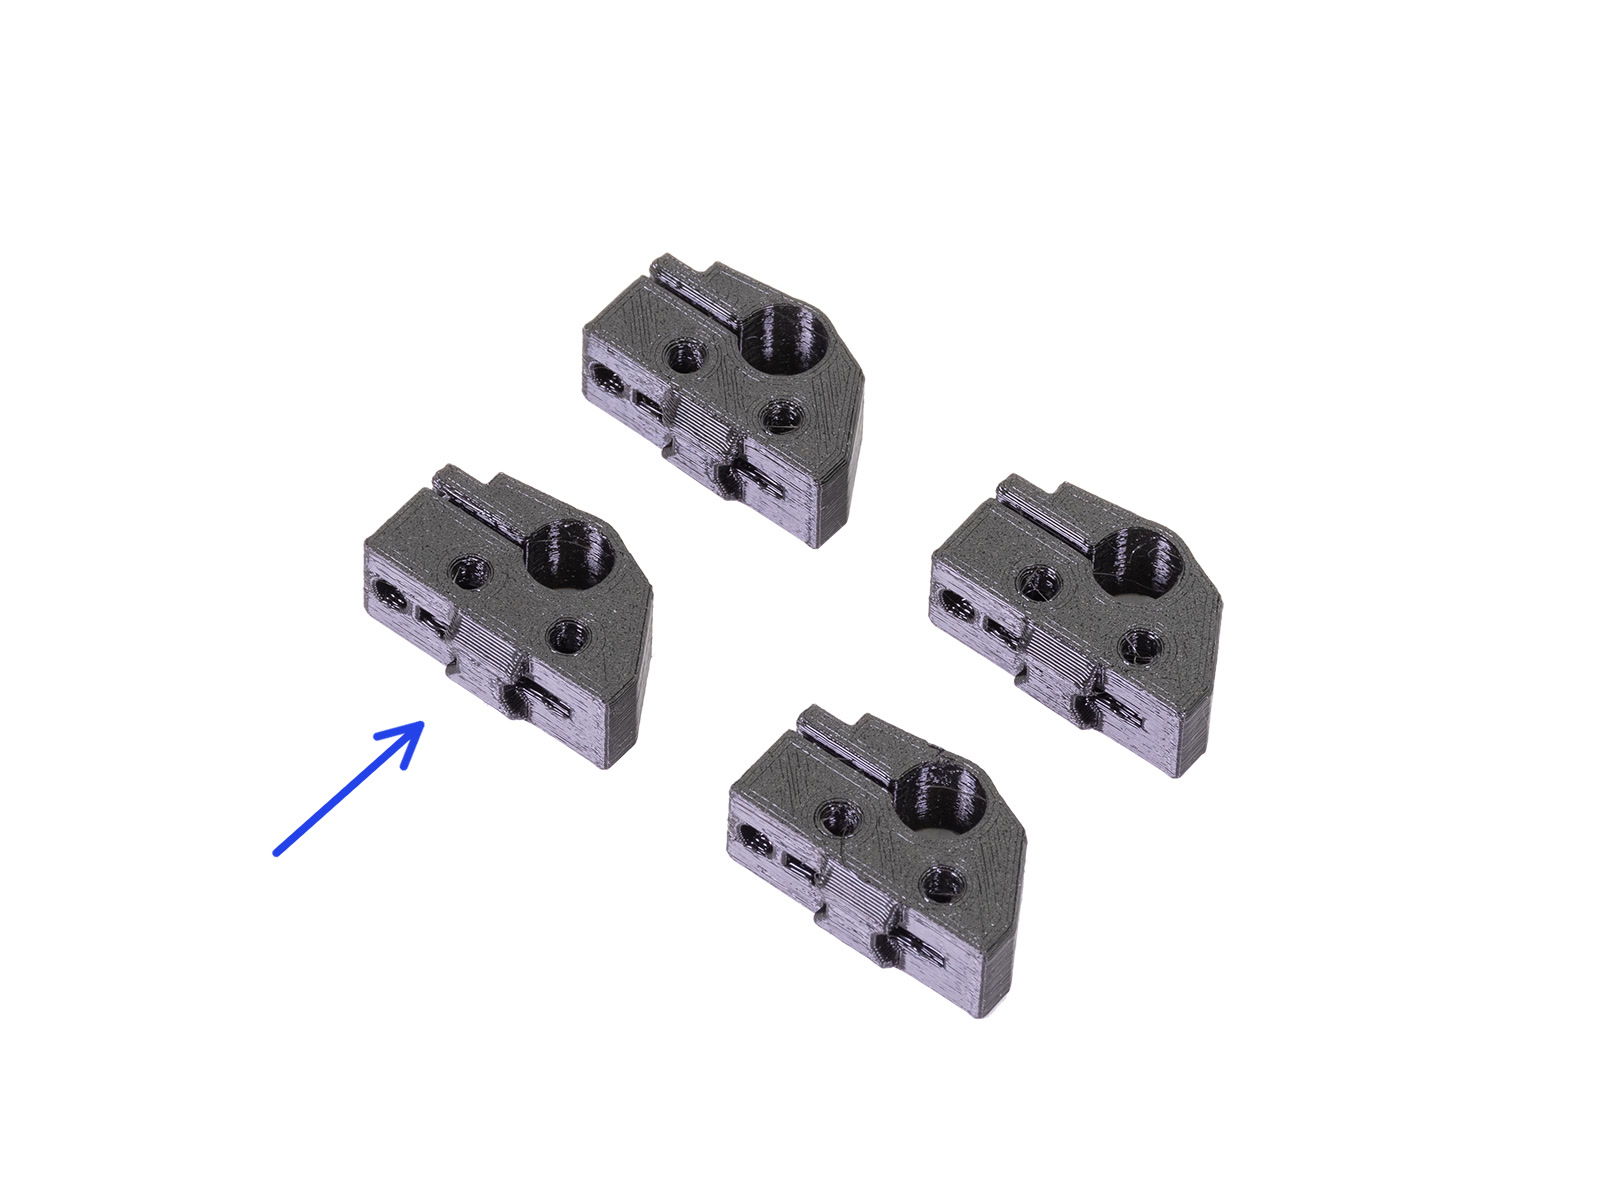 Y-axis: smooth rods holders